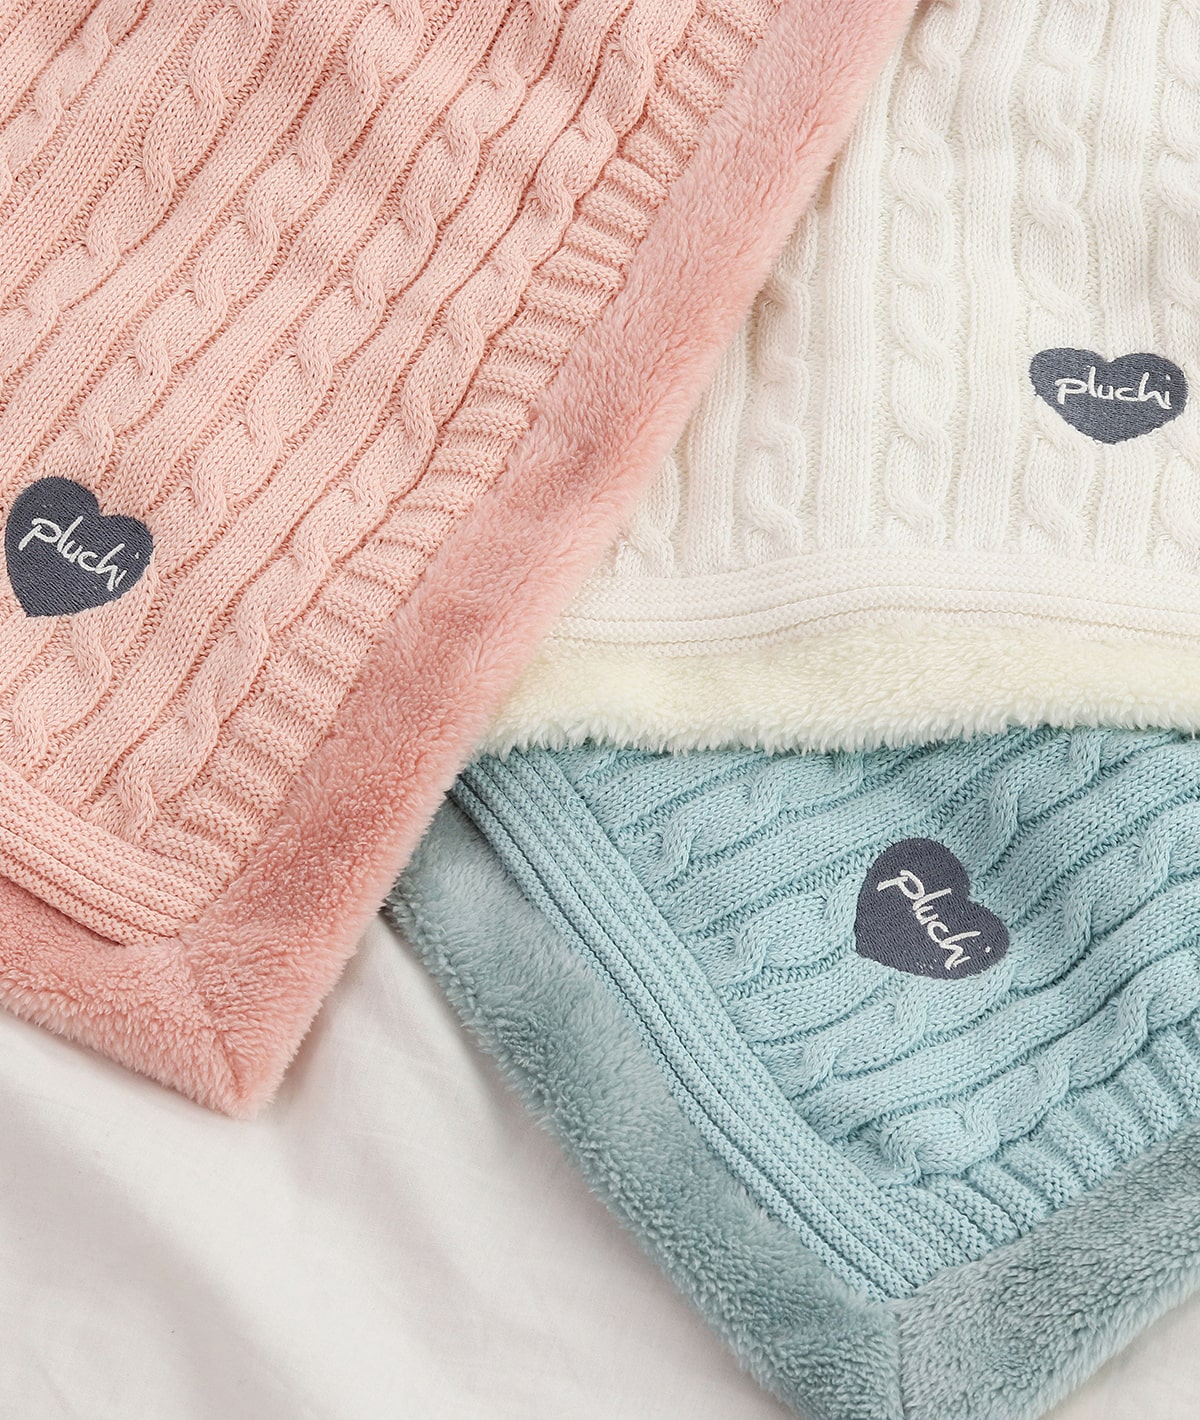 Cable Knit with Embroidered Heart- Baby Pink Cotton Knitted Blanket With Faux Fur Back For Babies